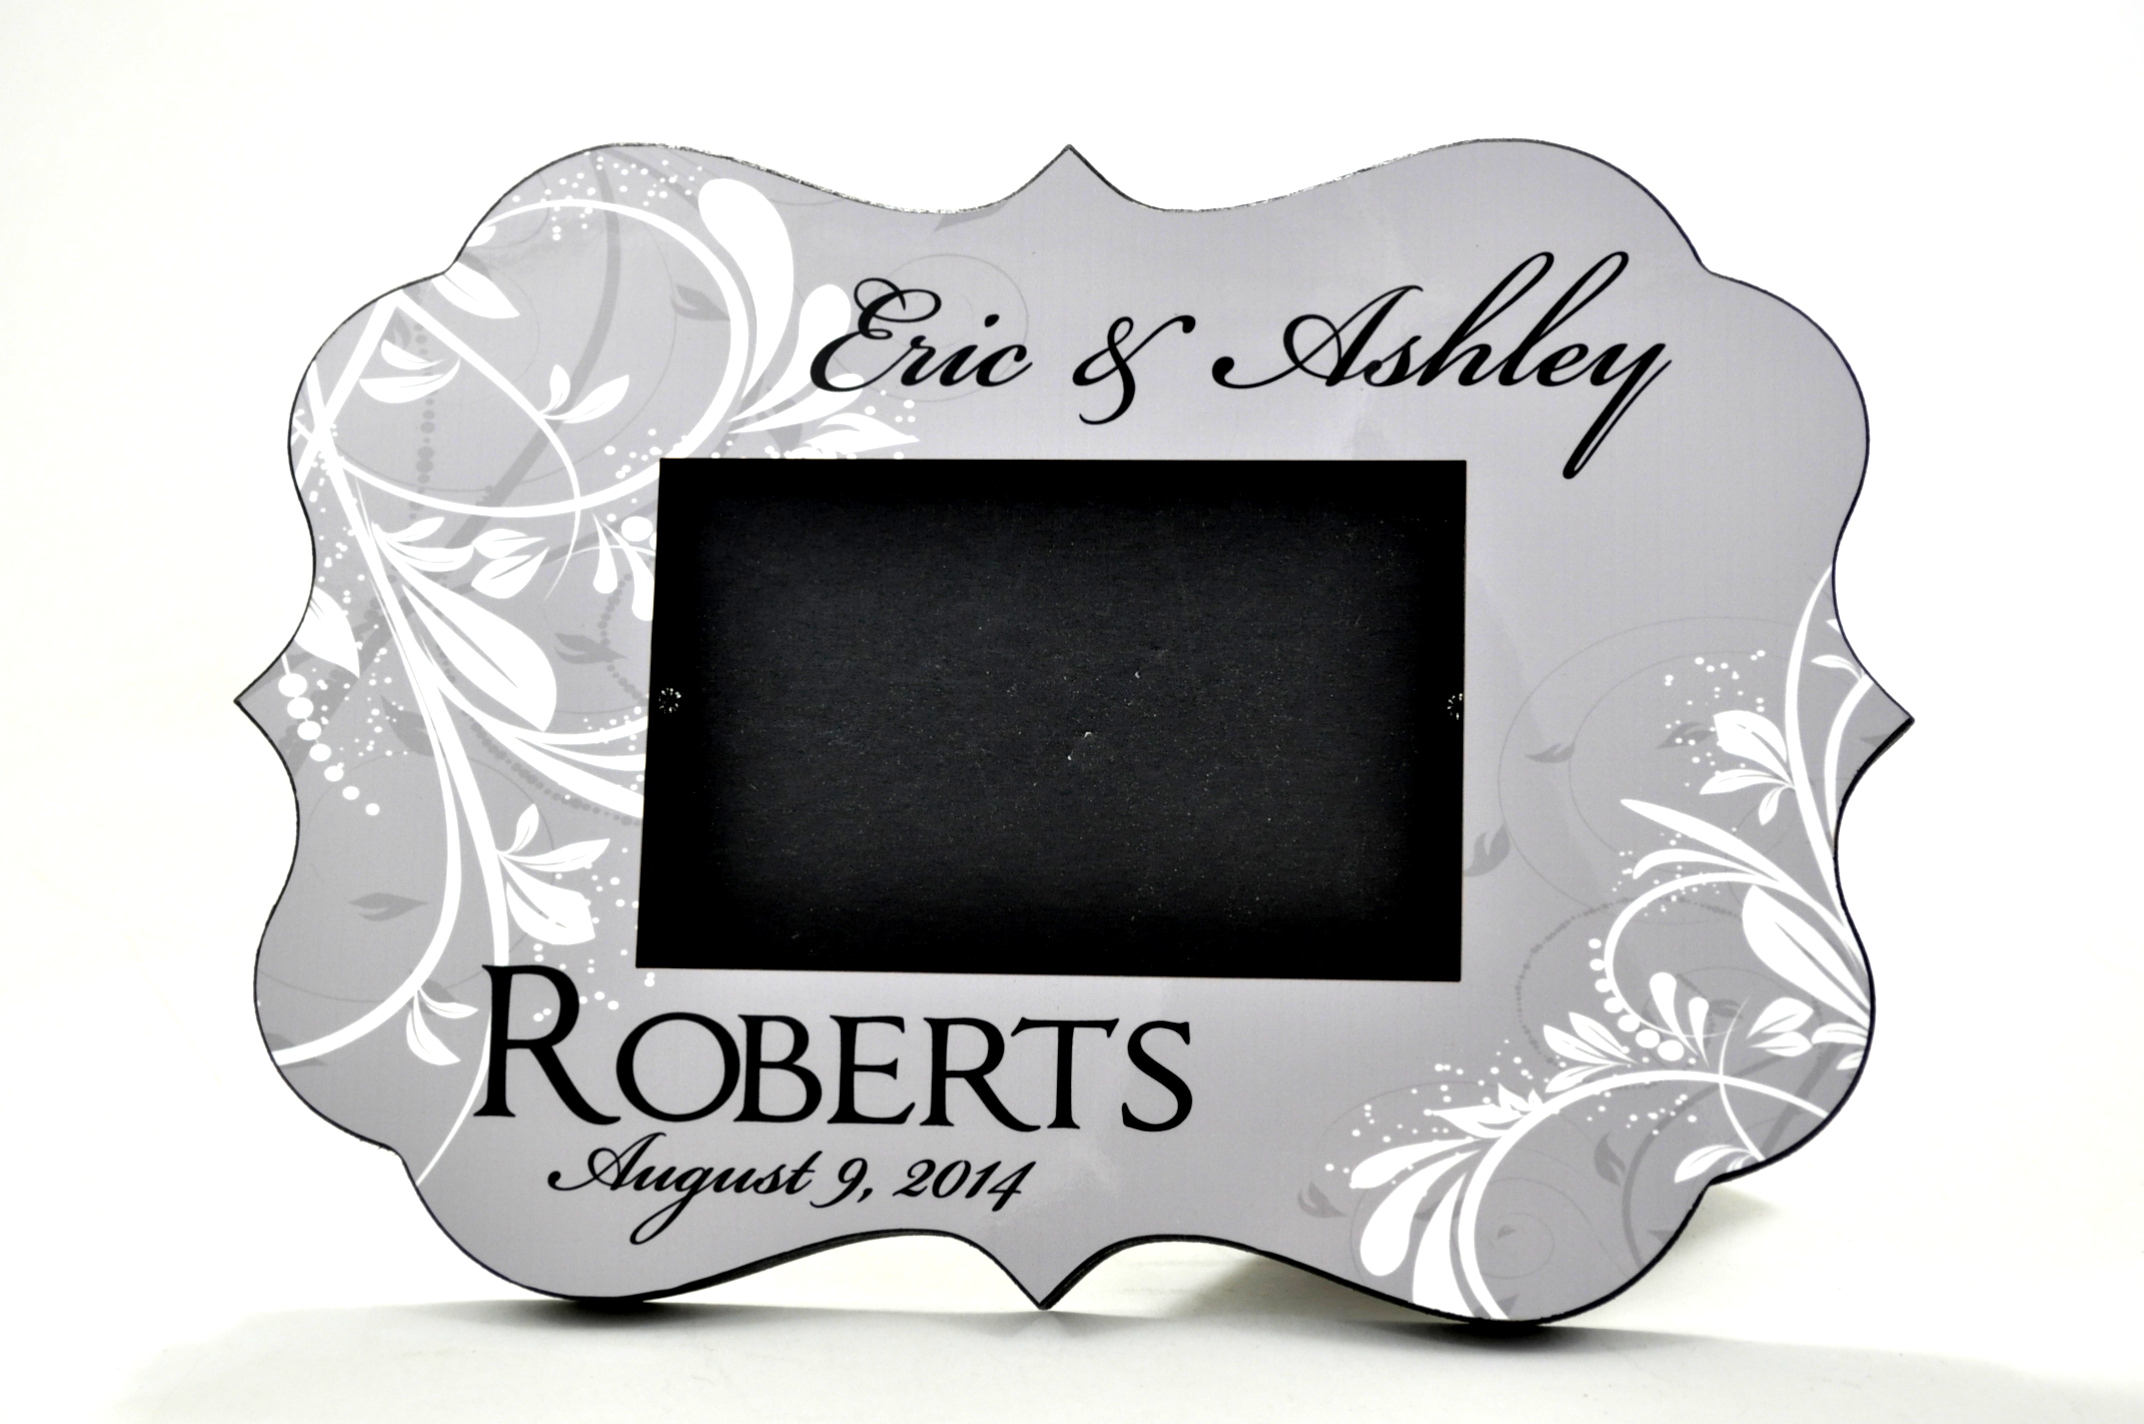 Custom Photo Frame made with sublimation printing